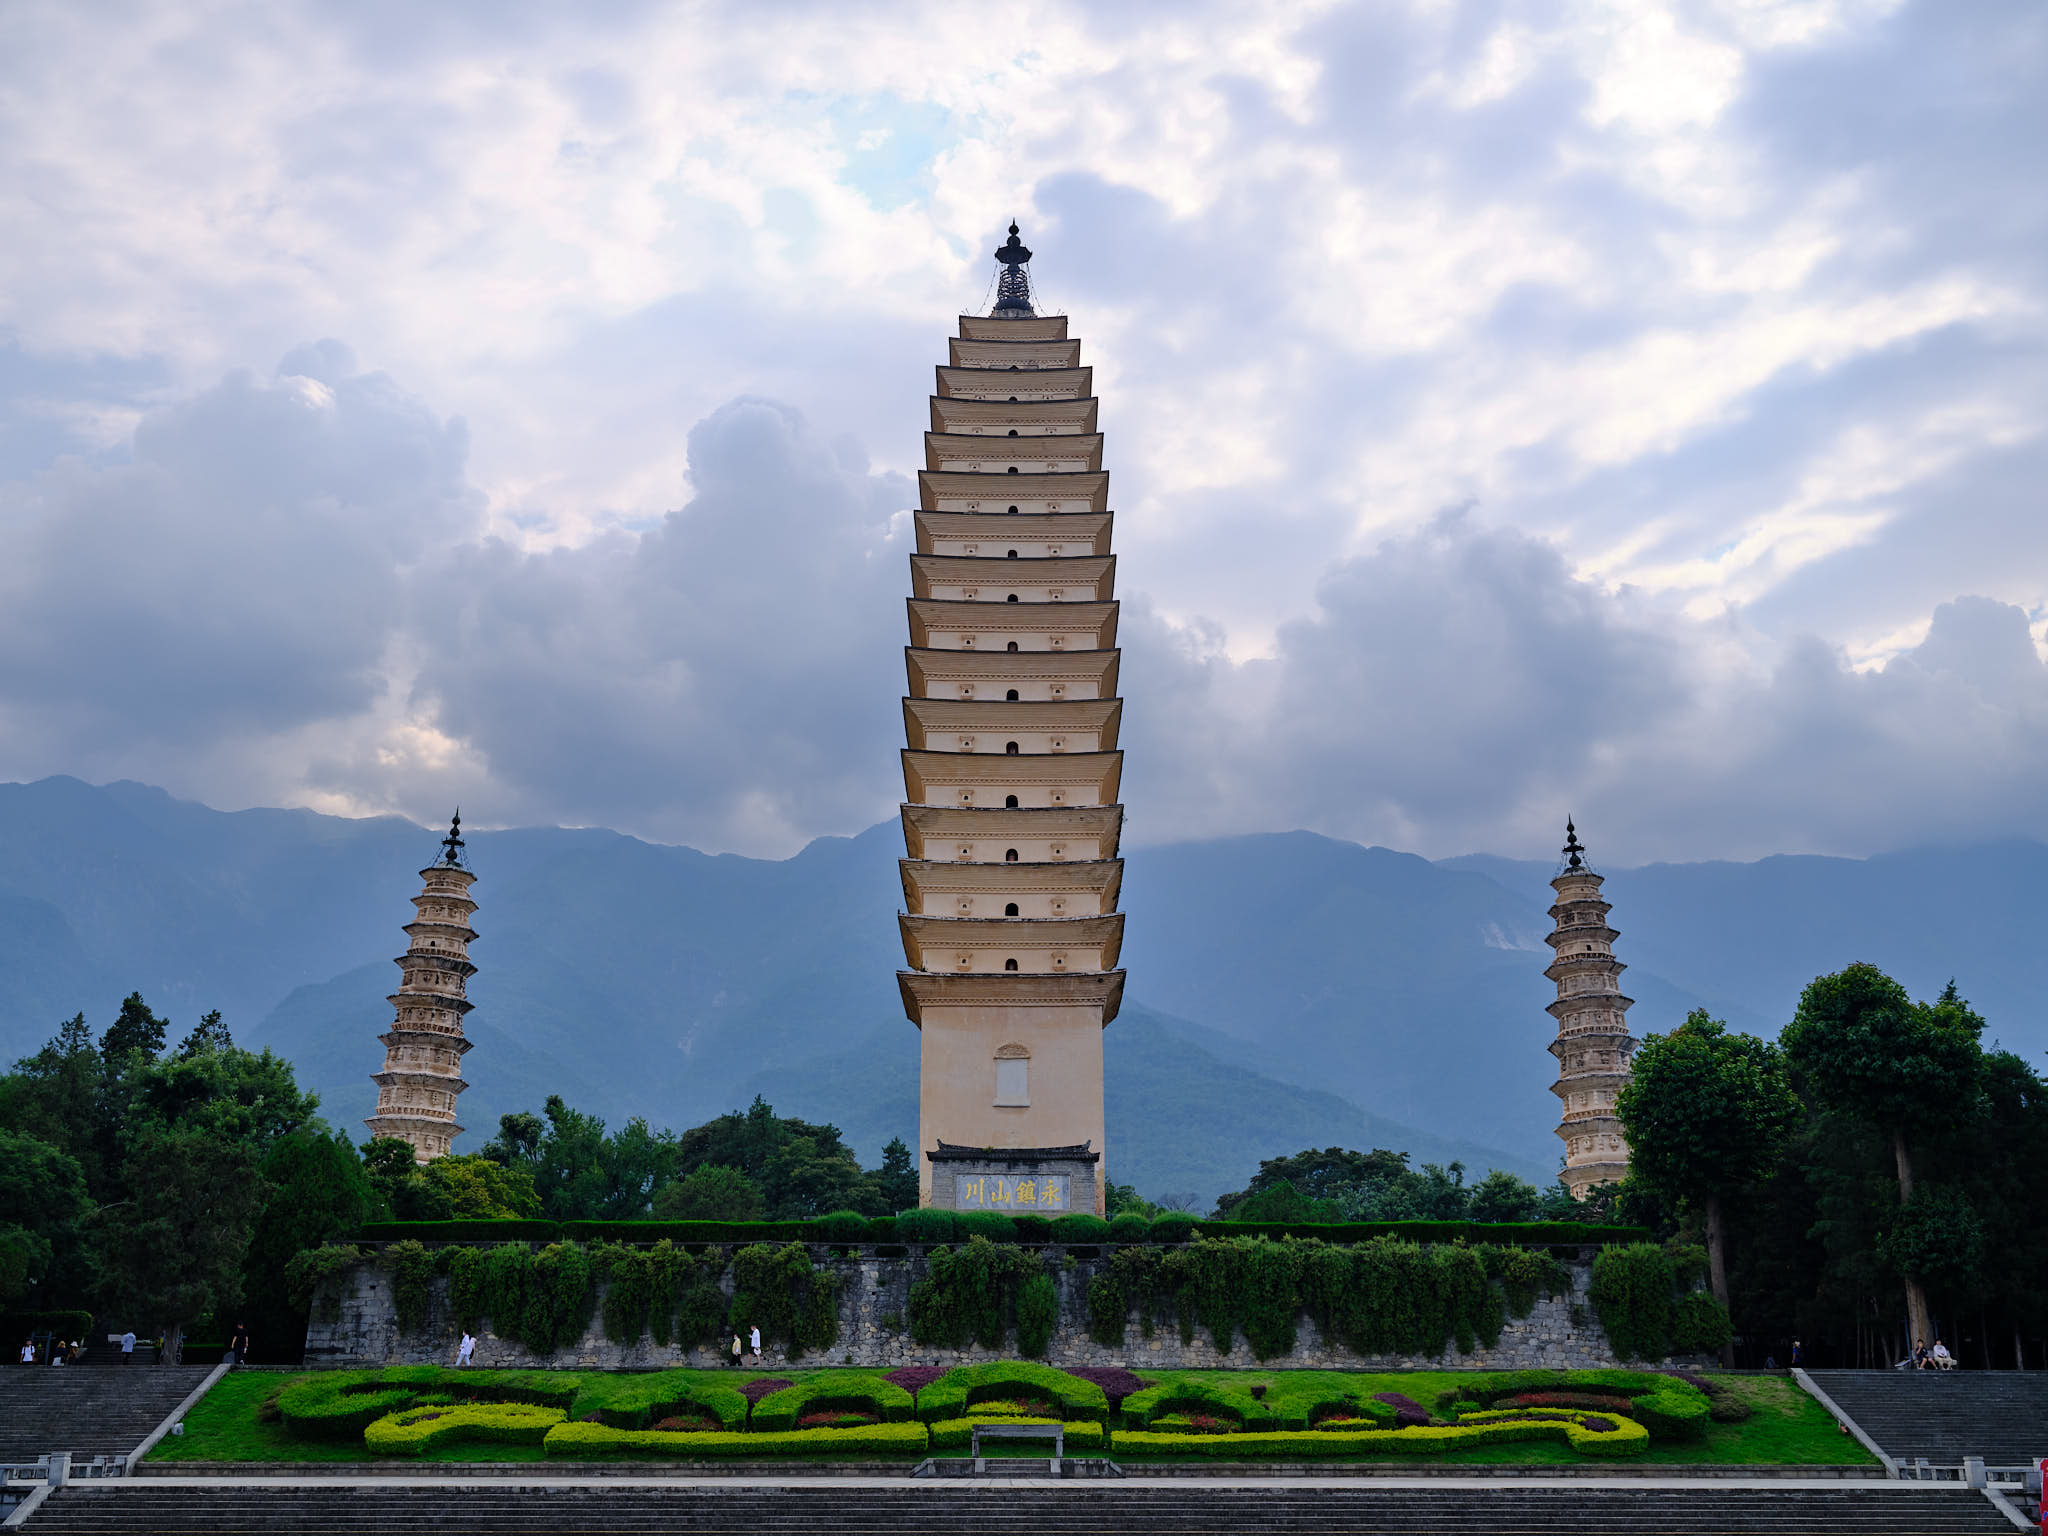 Three Pagodas front view with mountains in the back